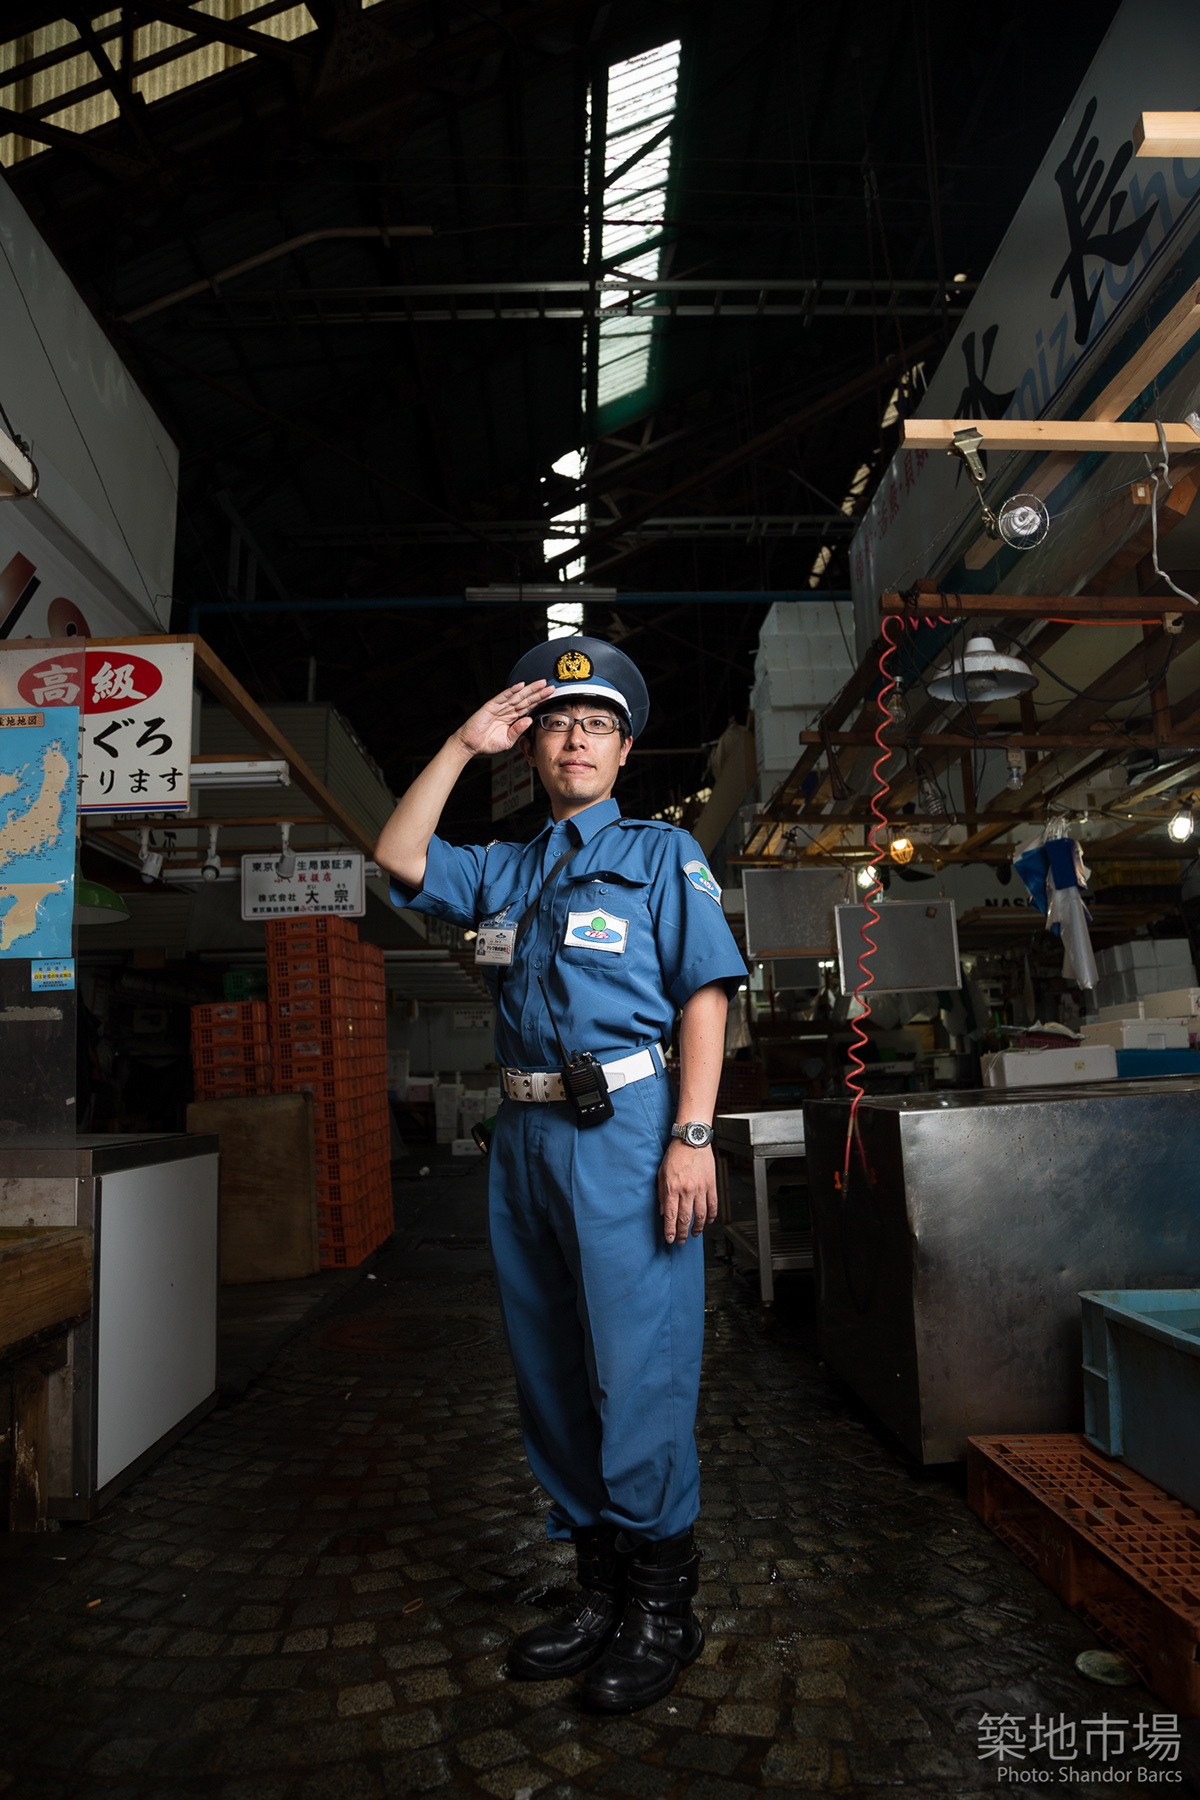 people fishmarket fish market Workers japanese portrait tsukiji tokyo japan Mexican photographer wide angle wideangle